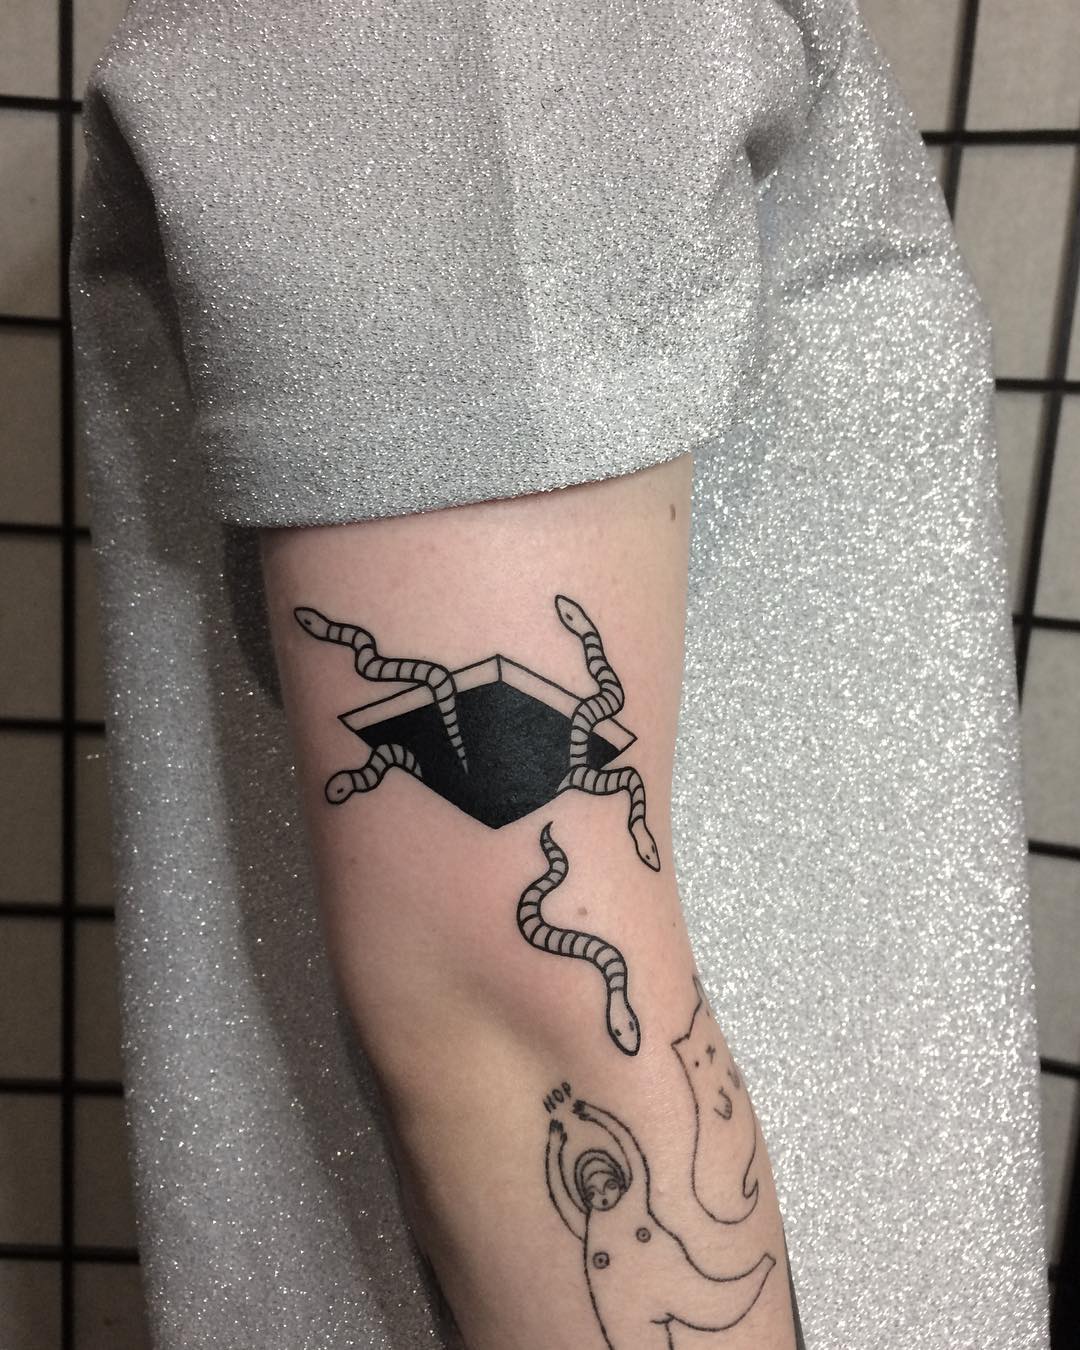 Tattoos by Olivia Harrison on Tumblr: little dipper and big dipper for two  sisters august 11 / 2015